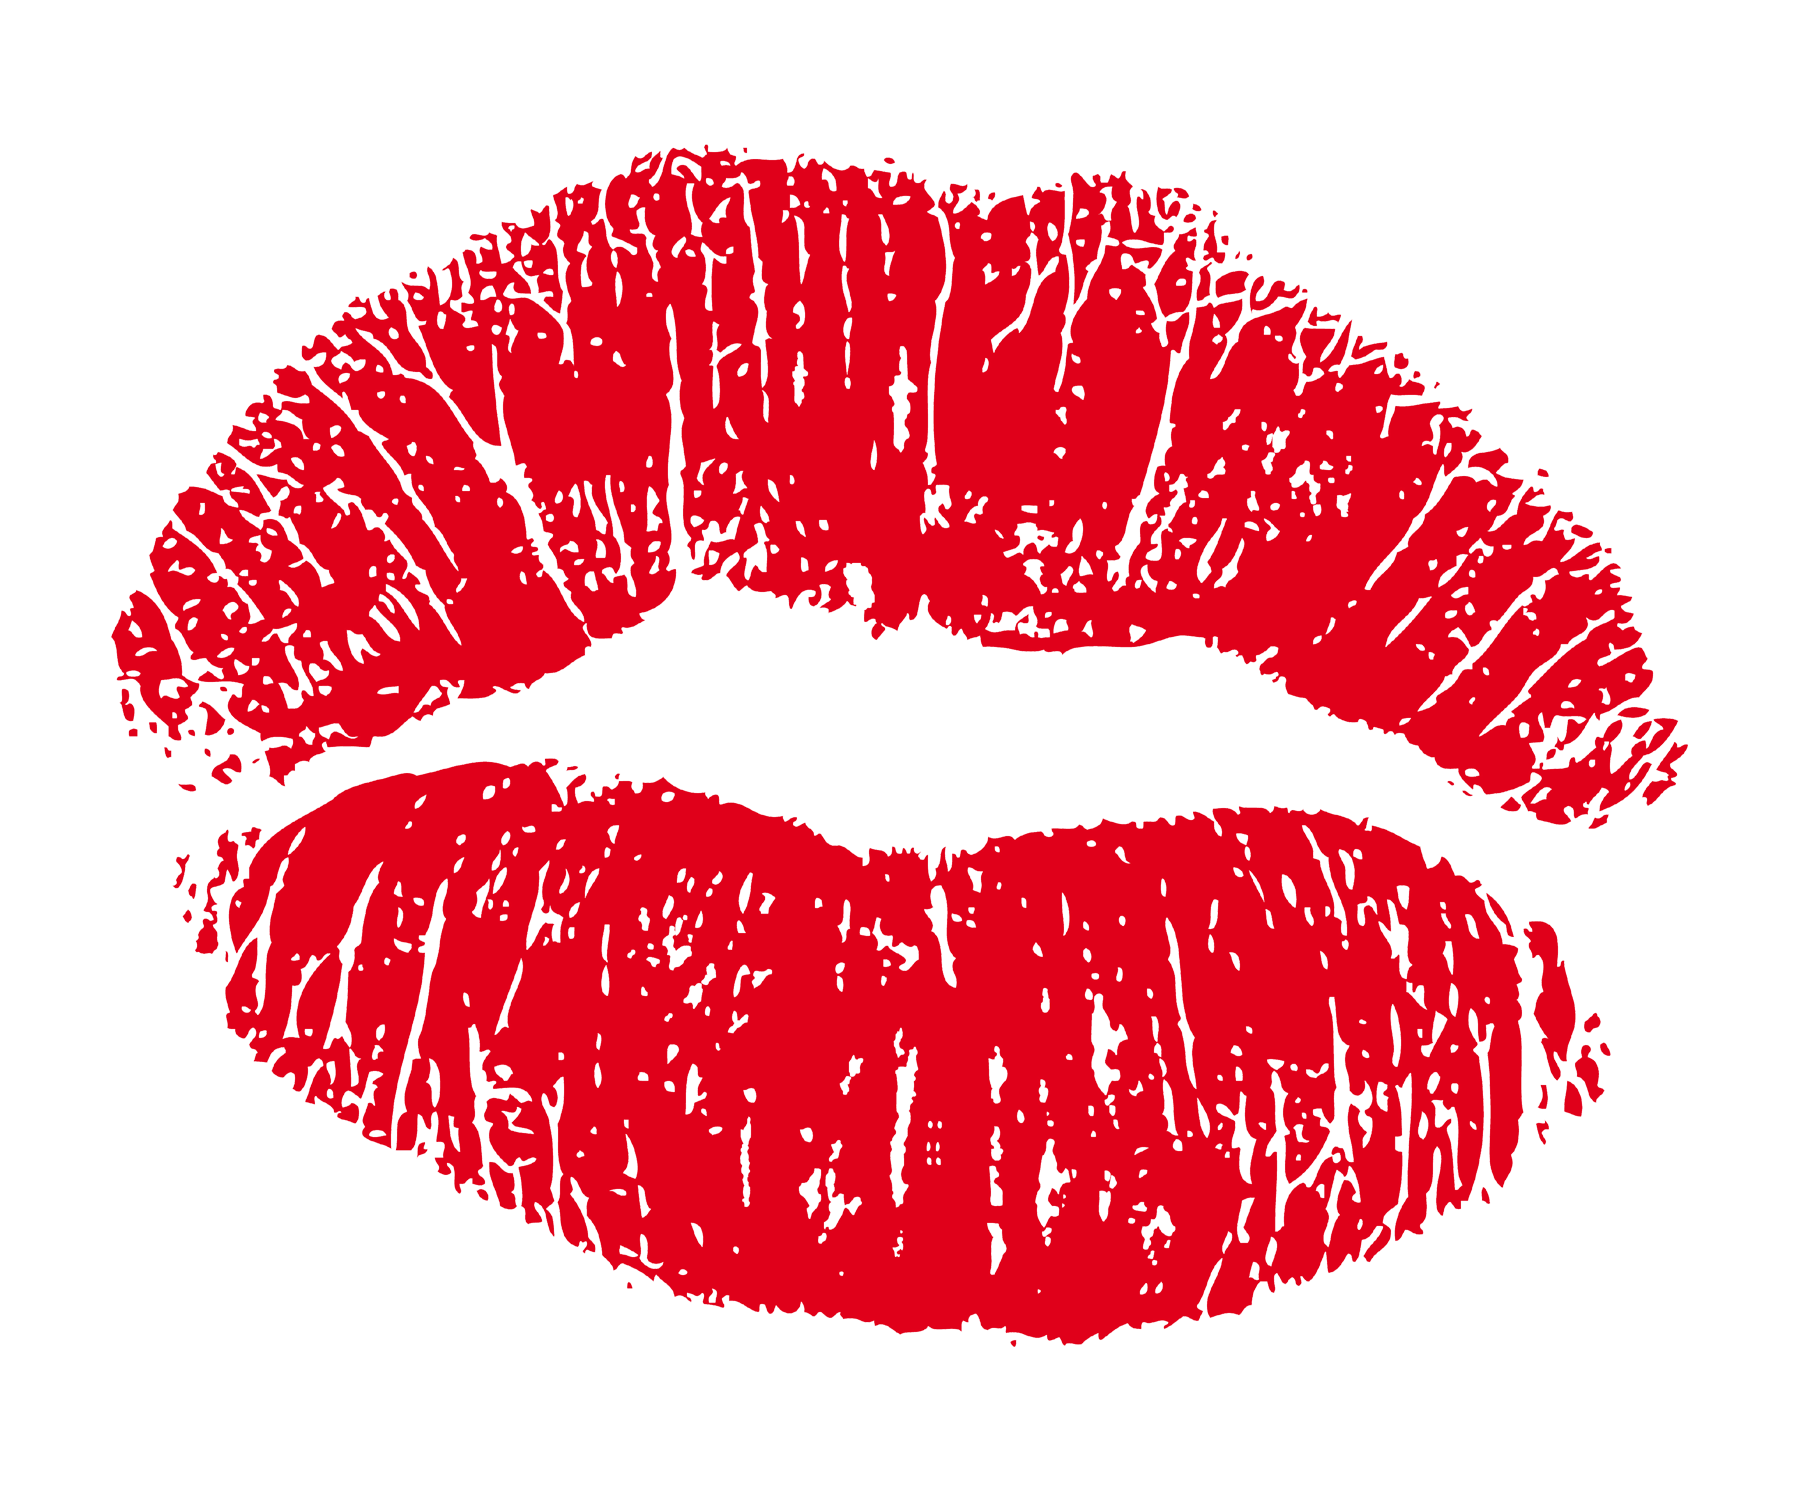 Lips Kiss Png Image Purepng Free Transparent Cc0 Png Image Library